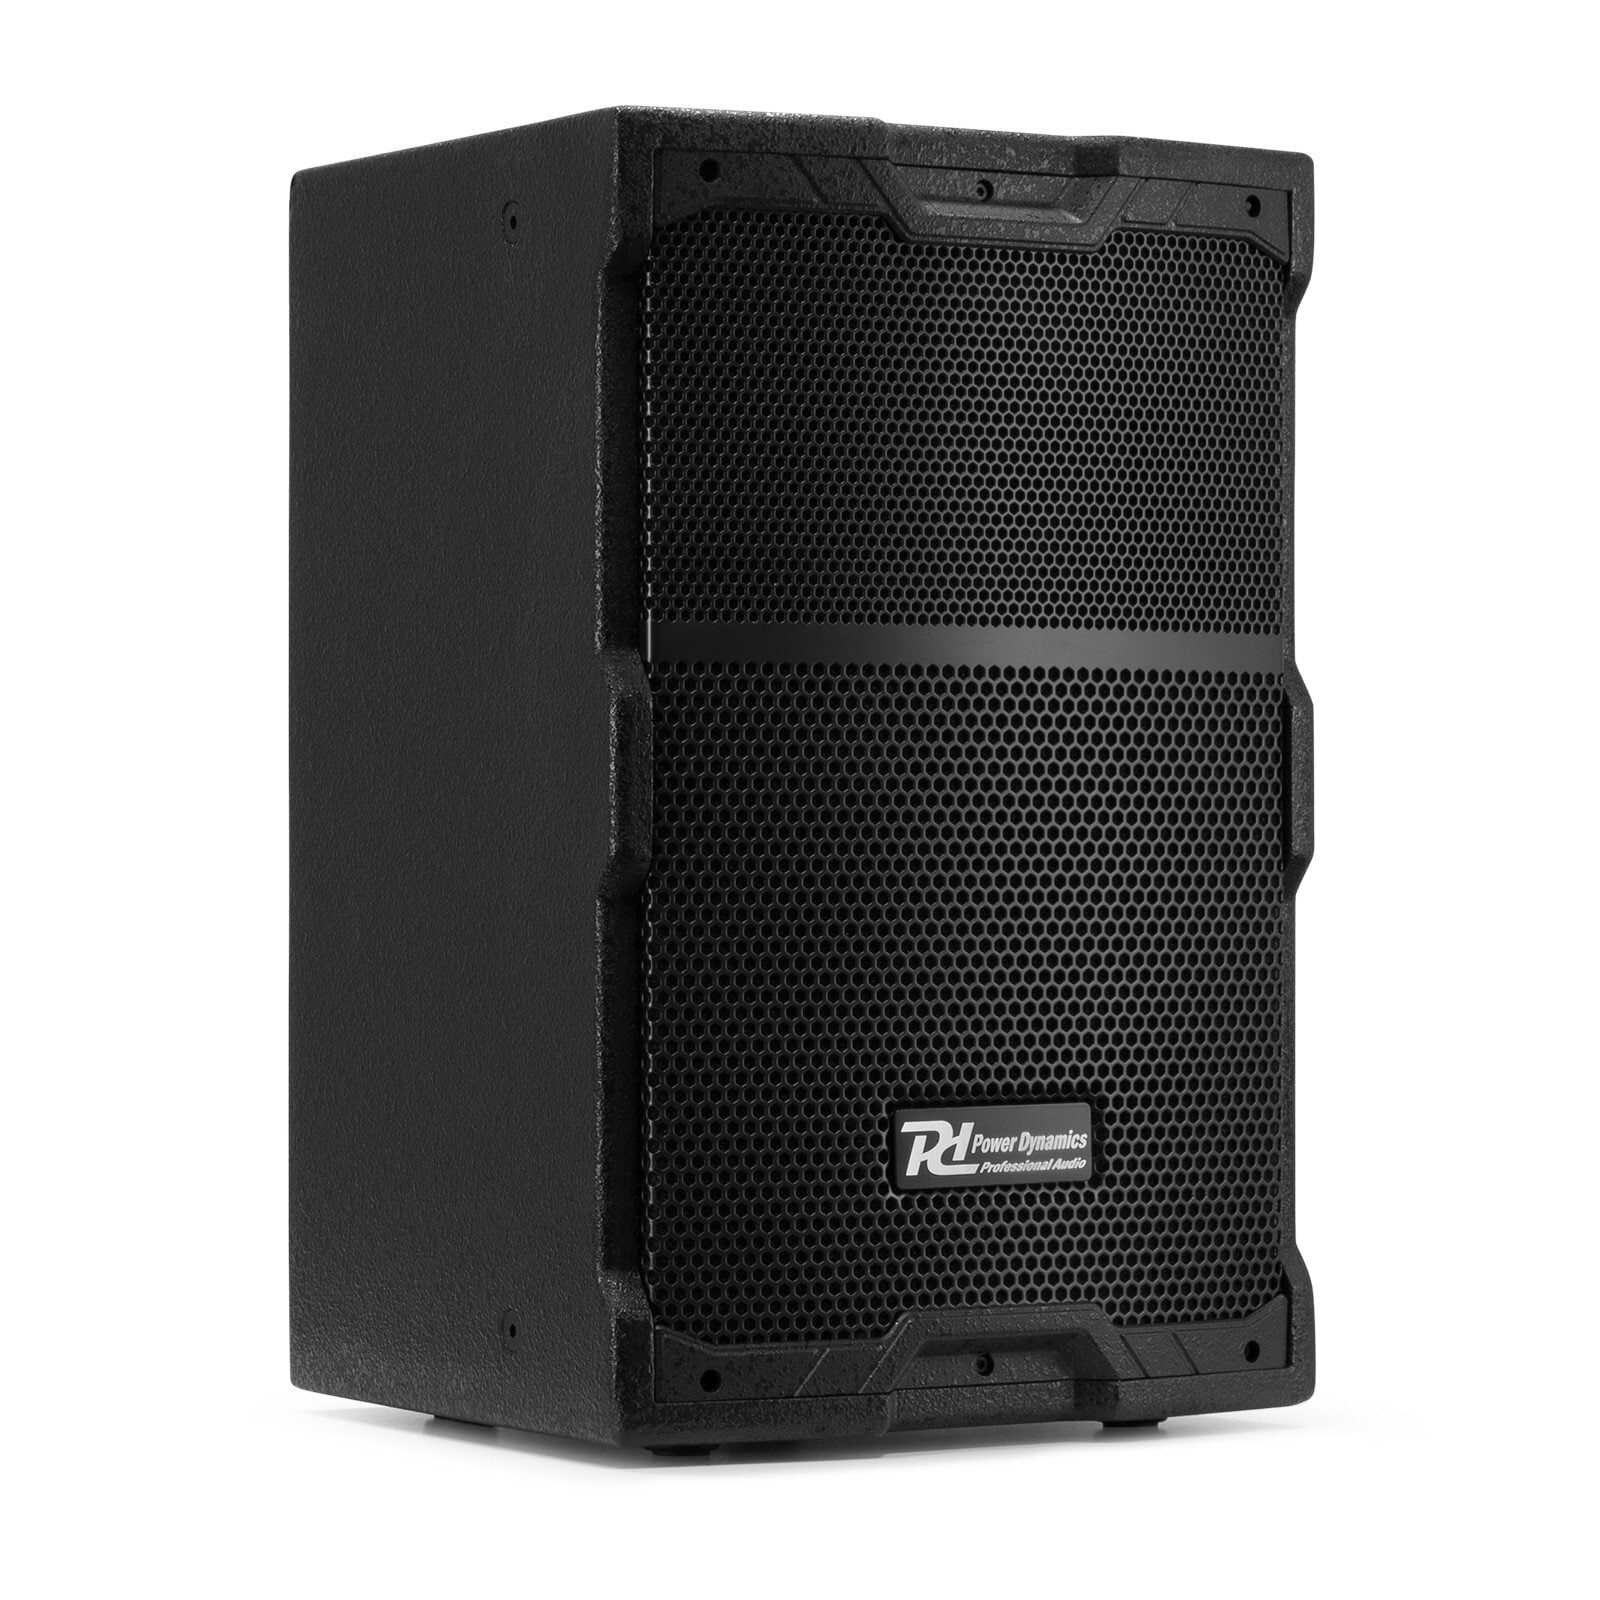 Power Dynamics PDY210A Active Speaker 10" 400W 